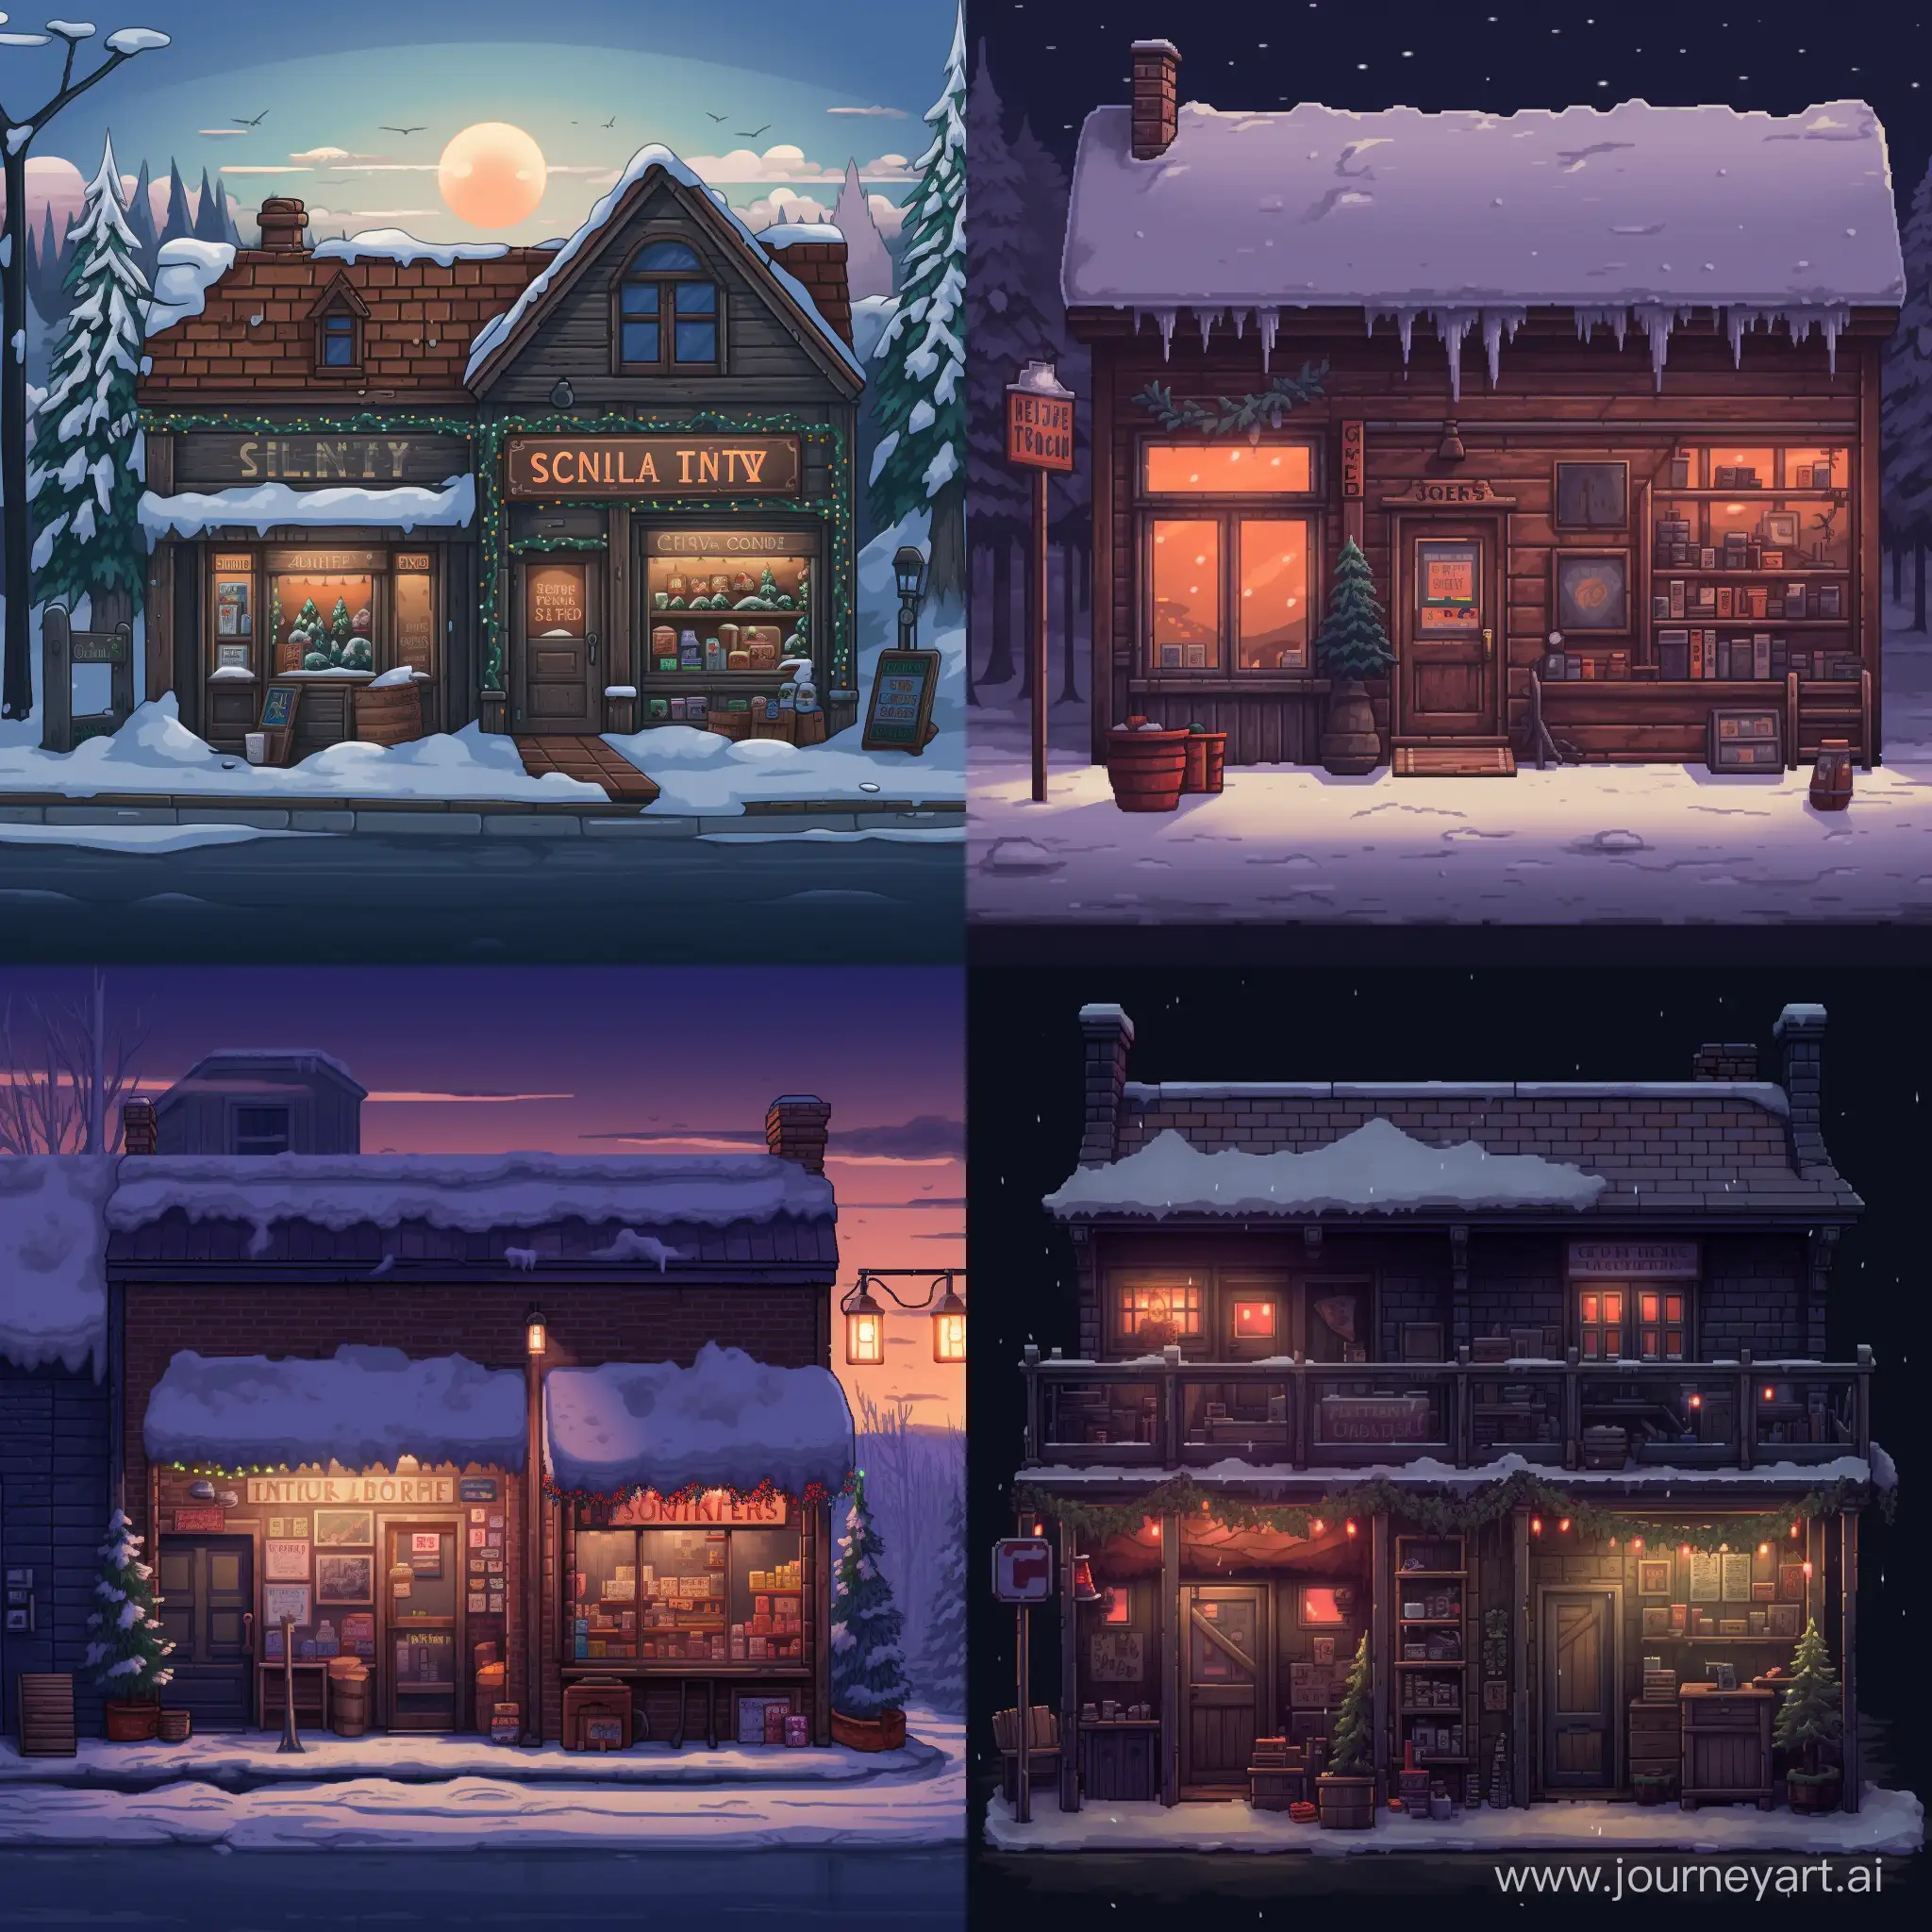 Solitary-Winter-Store-in-a-Small-Town-Cozy-Entrance-Amidst-Dark-8Bit-Ambiance